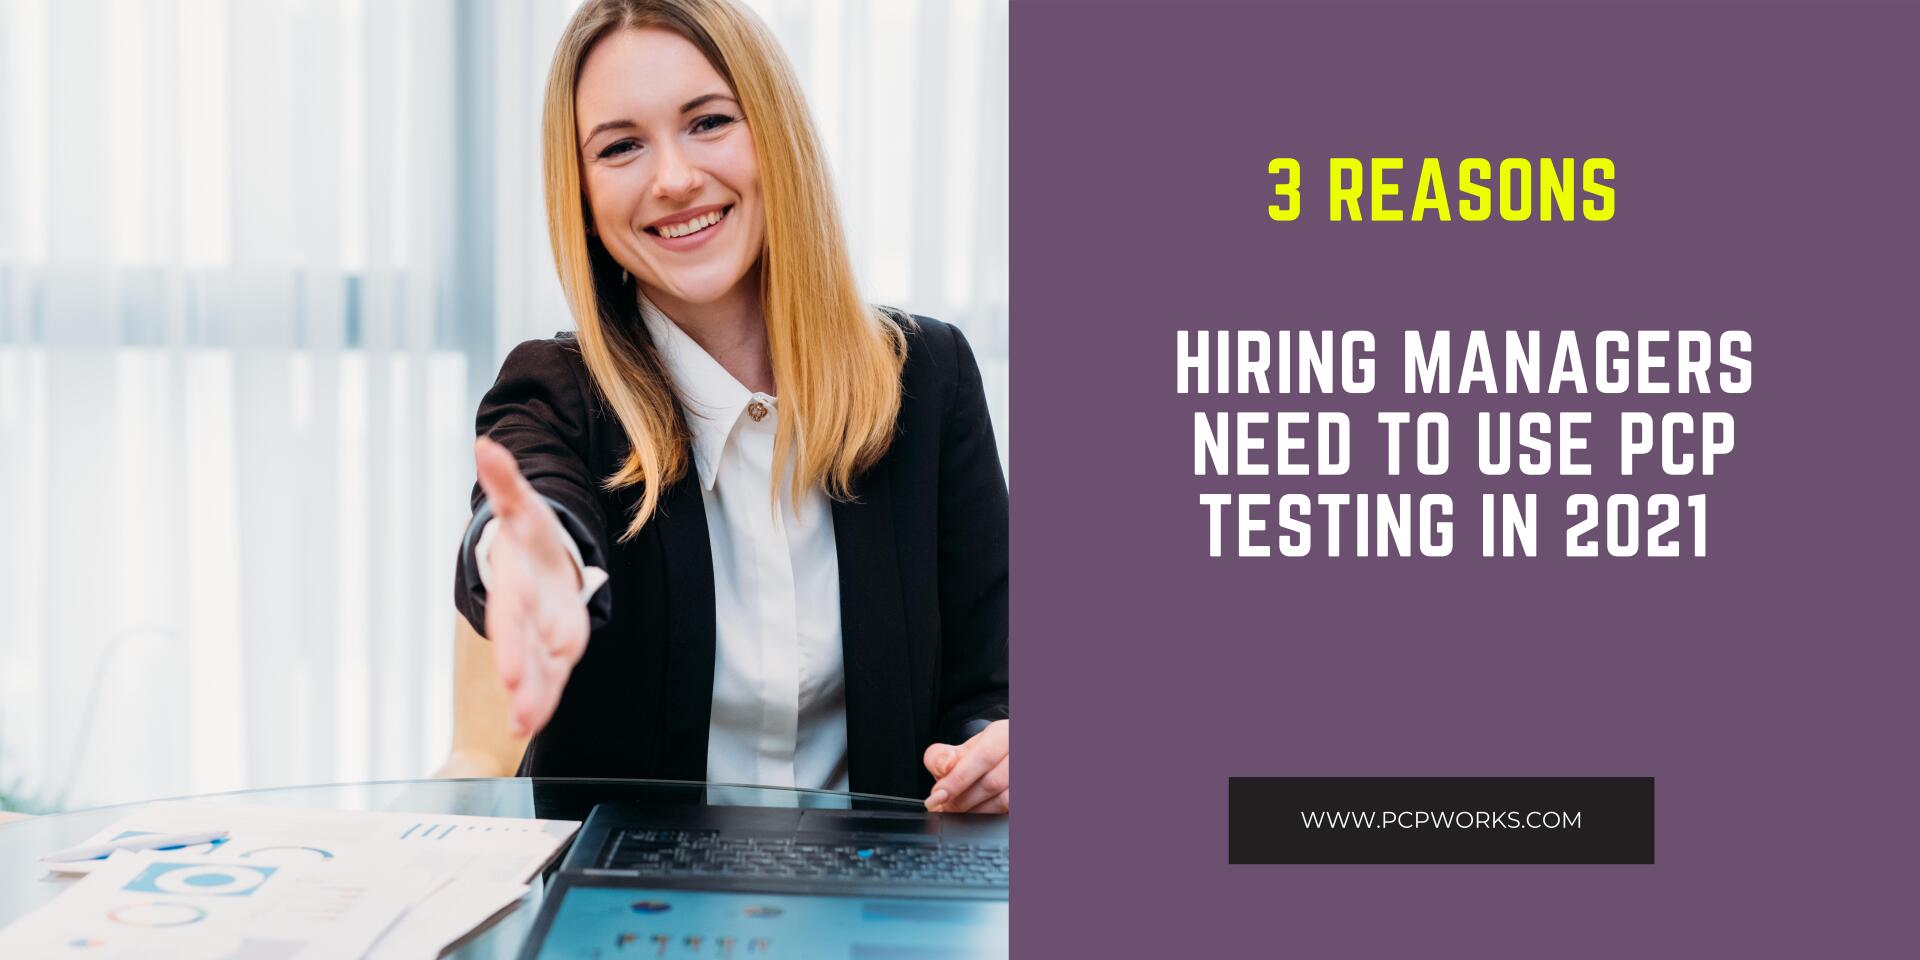 3 Reasons Why Hiring Managers Need to Use PCP Testing in 2021